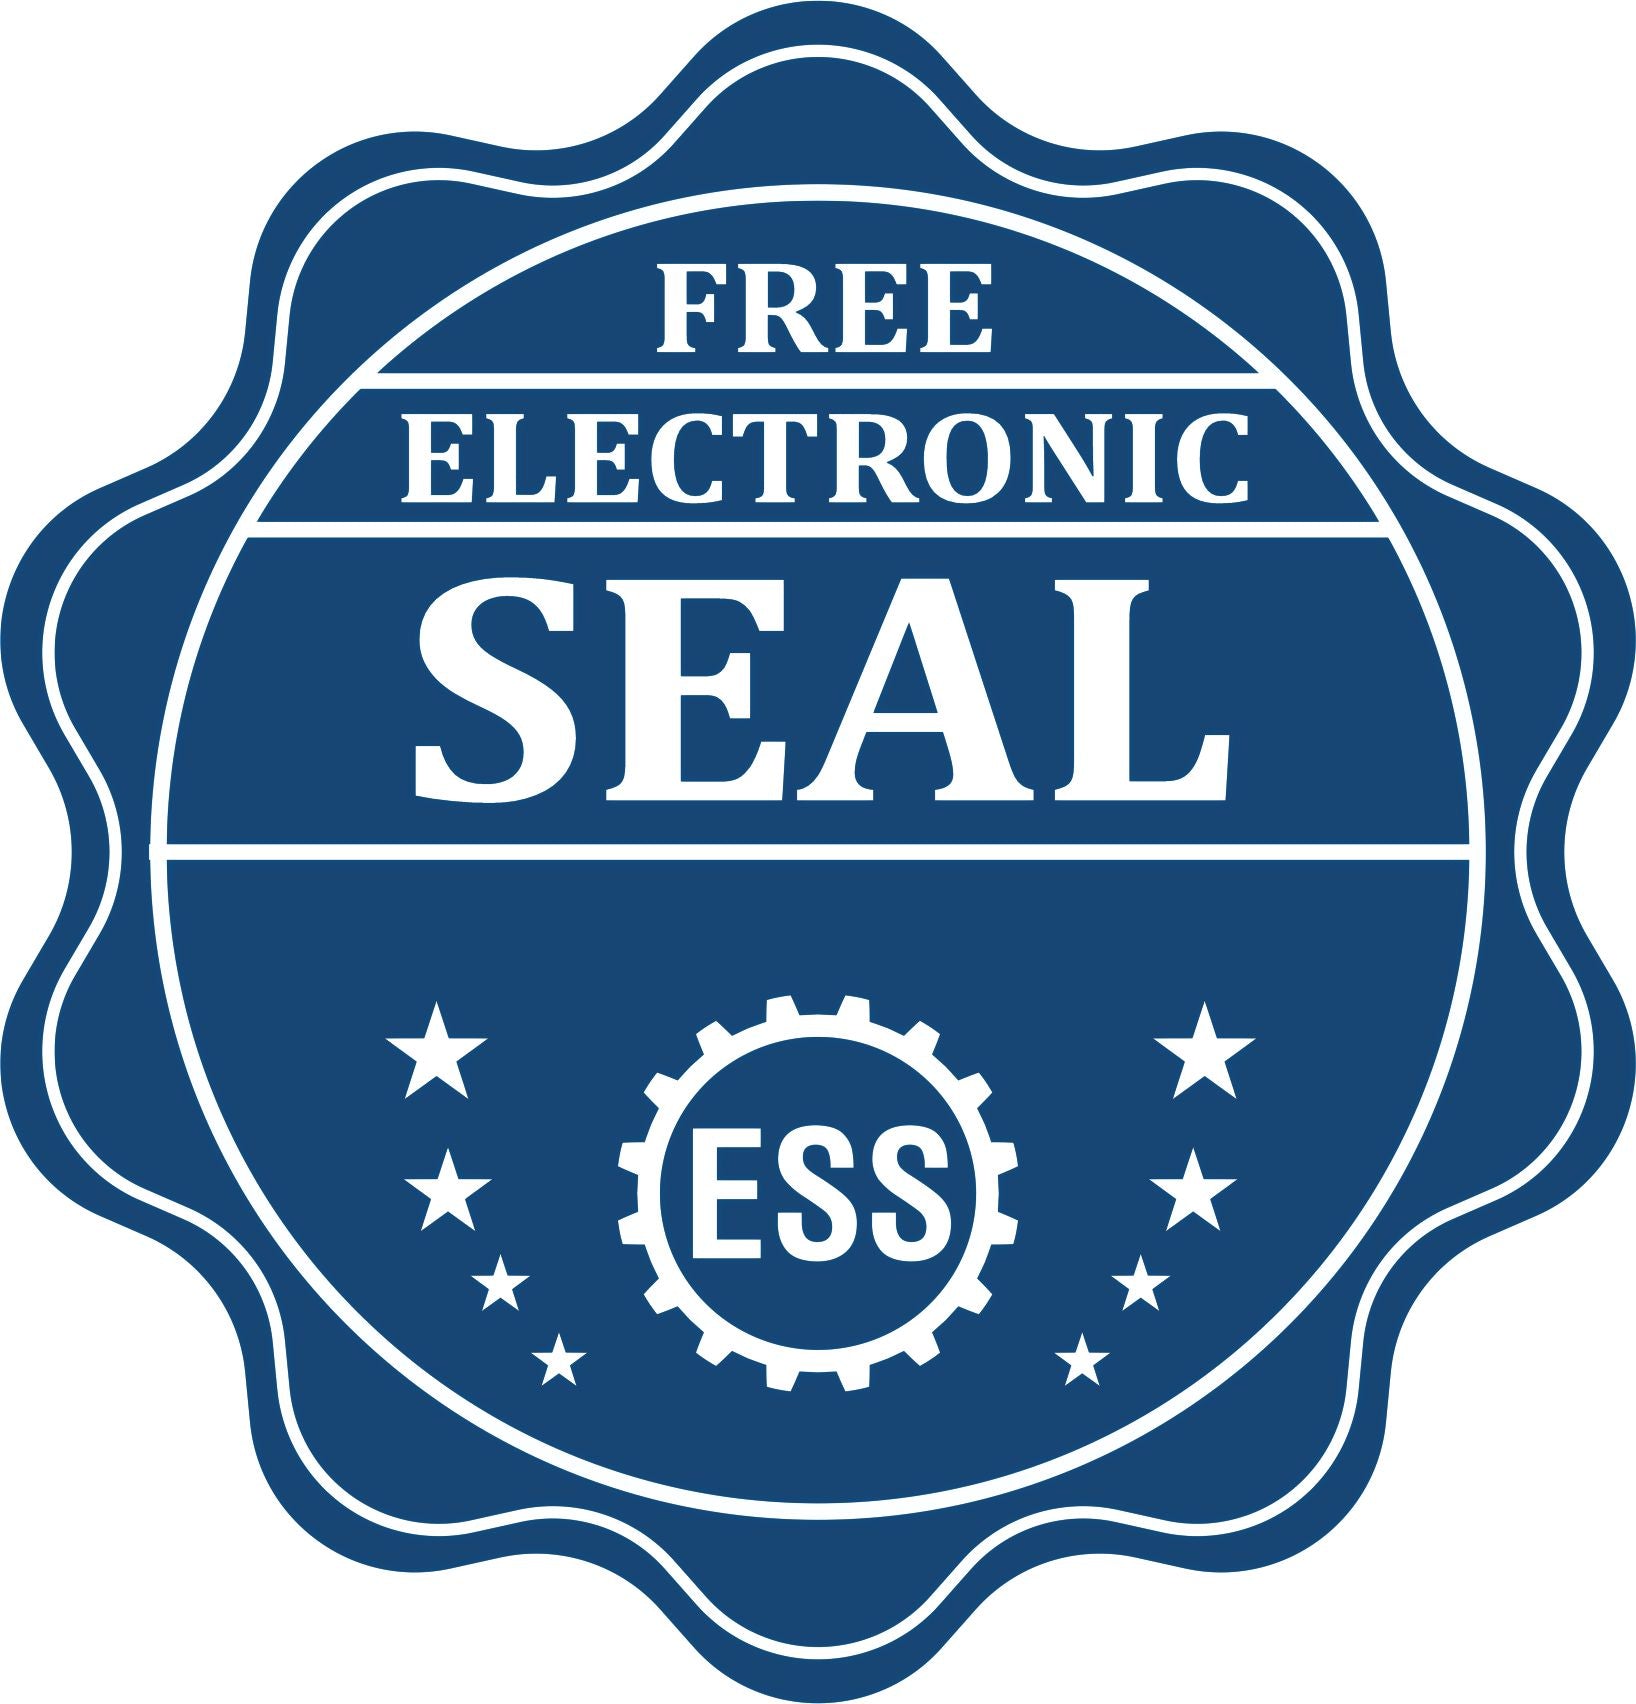 A badge showing a free electronic seal for the Long Reach North Dakota Geology Seal with stars and the ESS gear on the emblem.